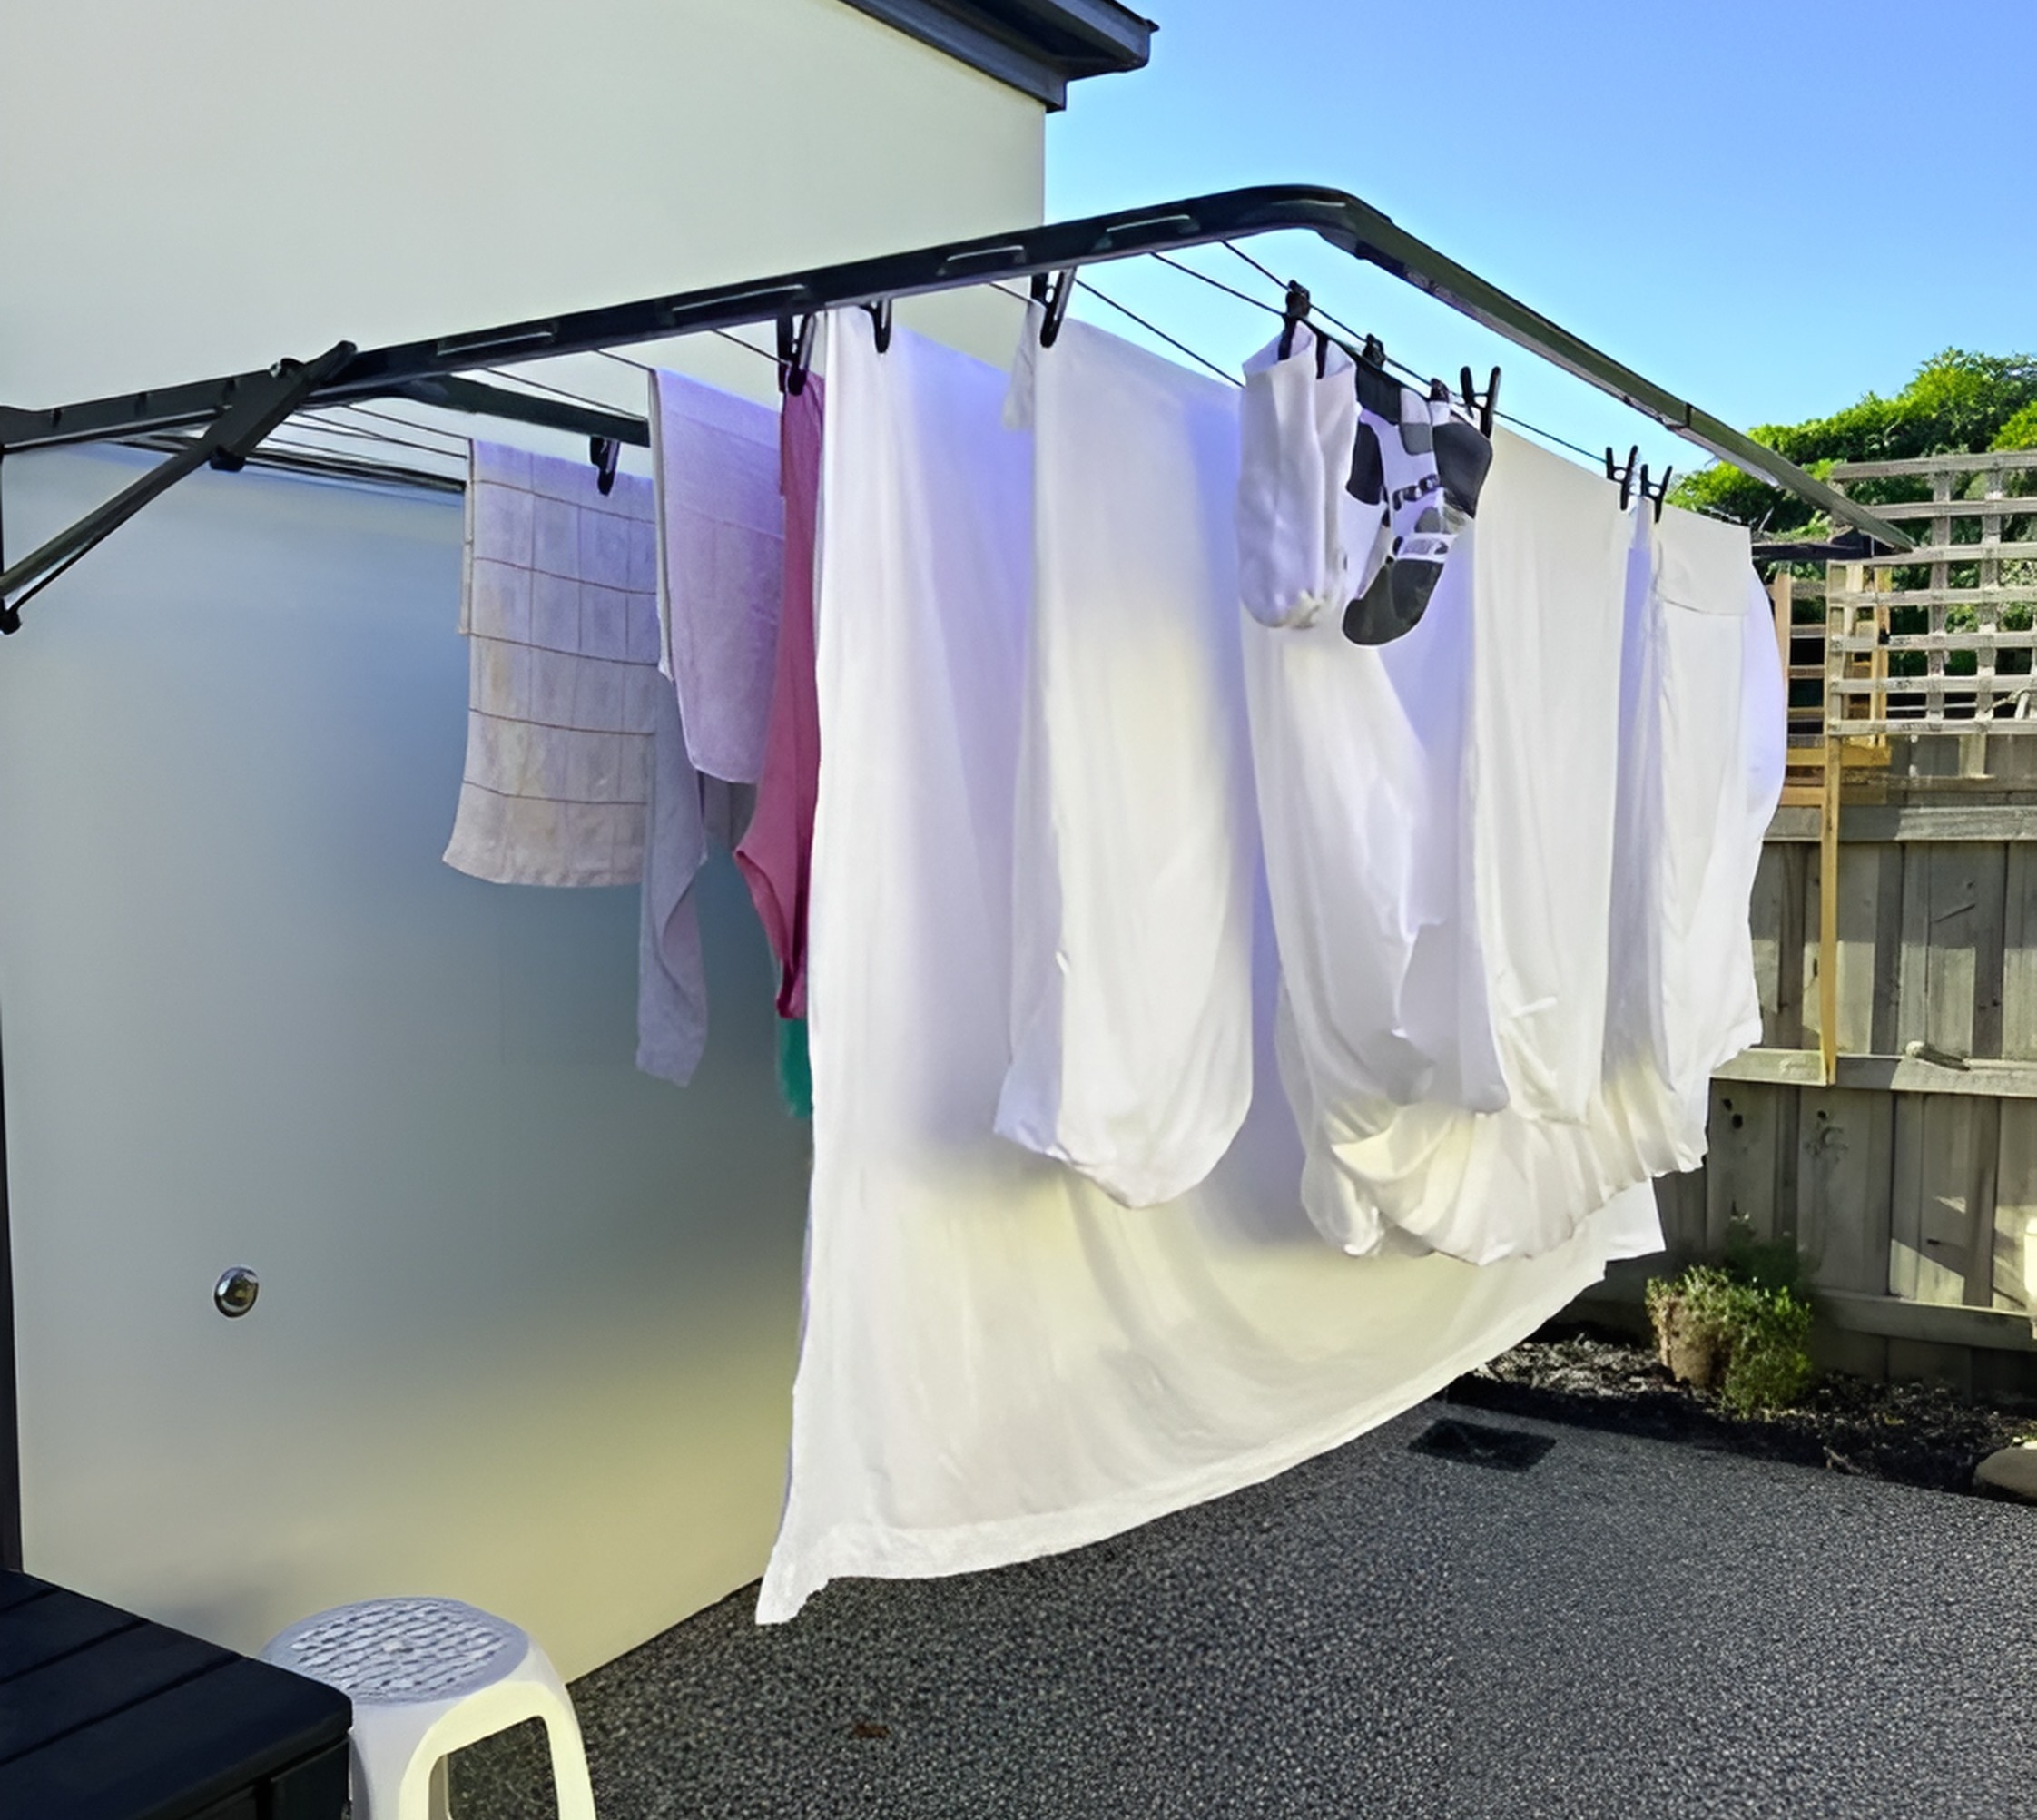 Best Large Clothesline for a Family of 4 1. Selecting the Ideal Clothesline for a Four-Person Household